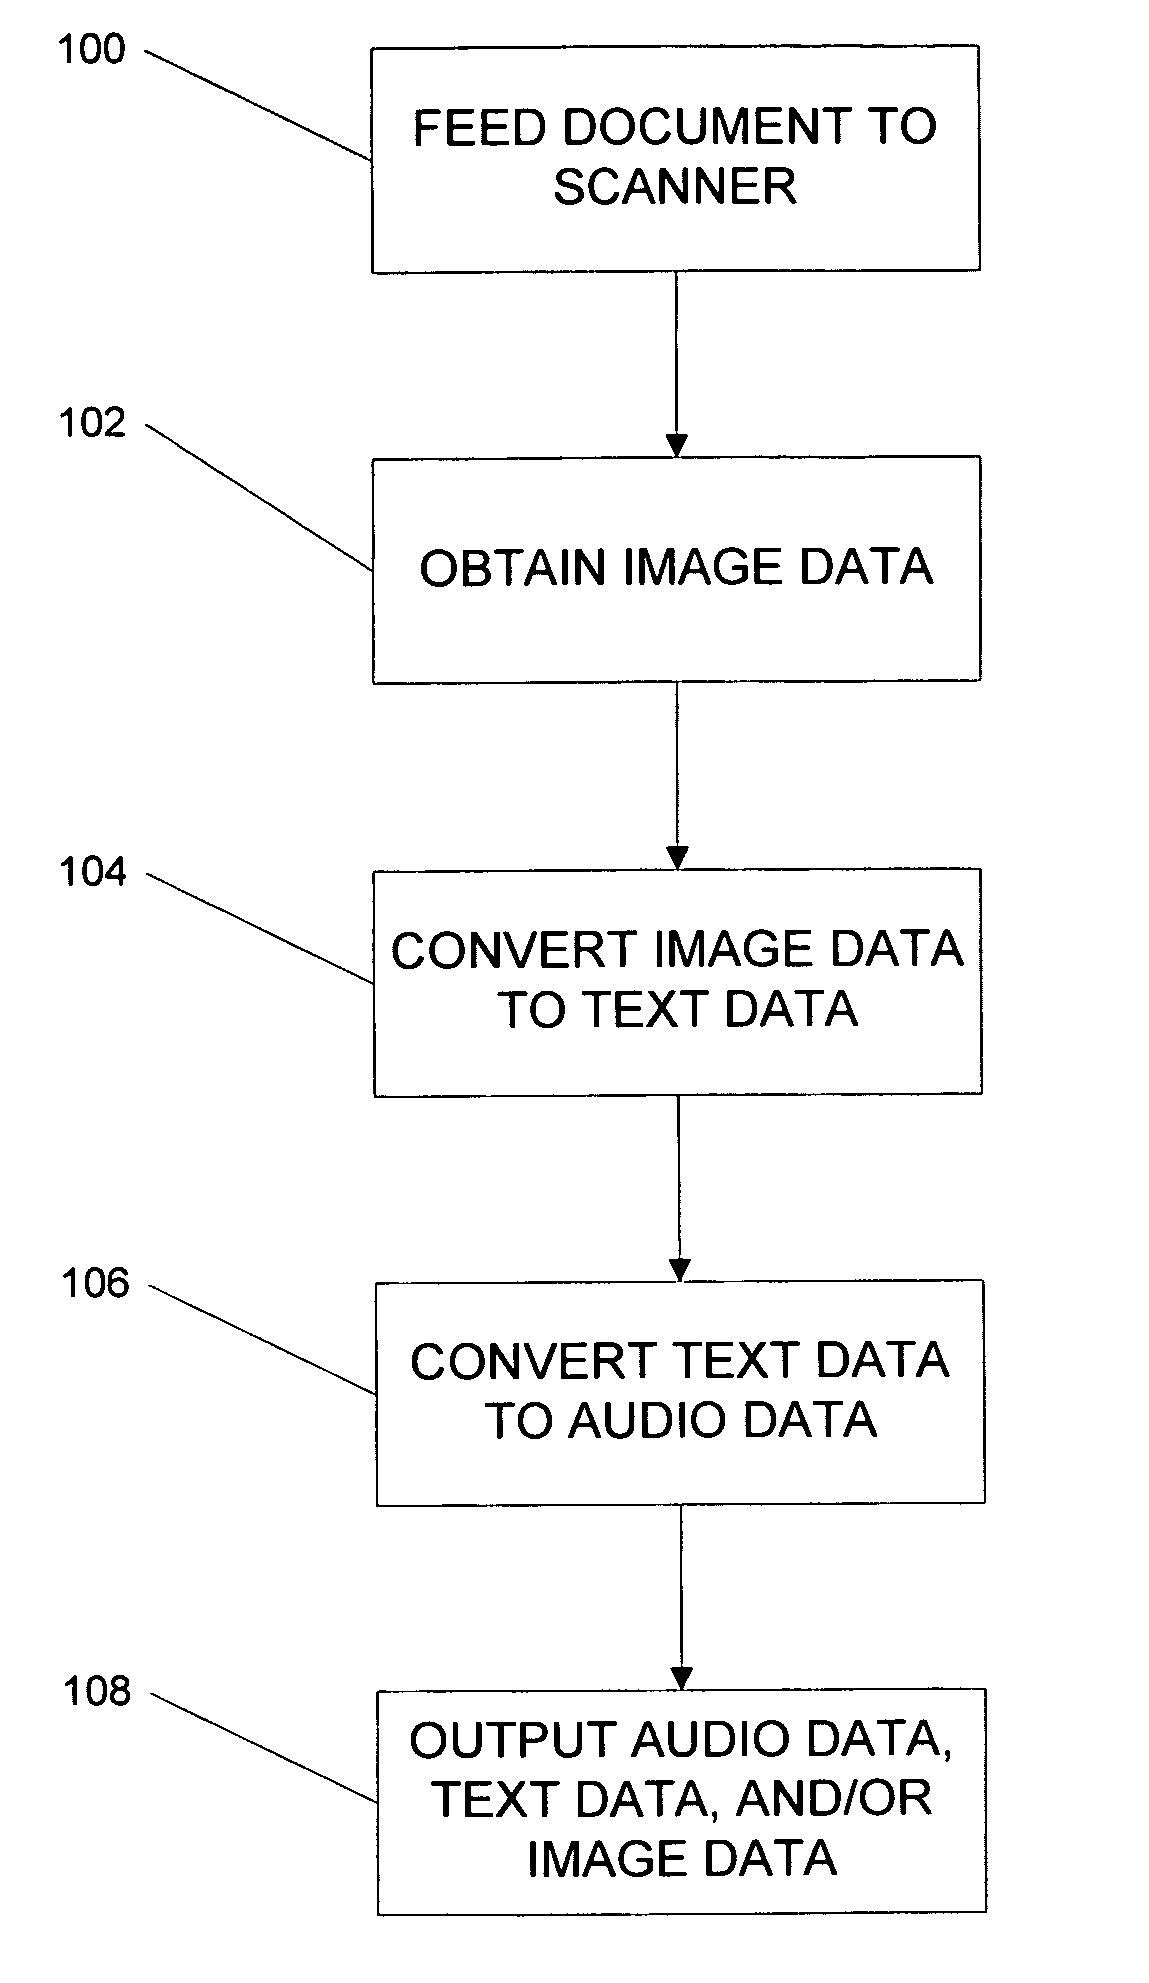 Method and device for converting scanned text to audio data via connection lines and lookup tables